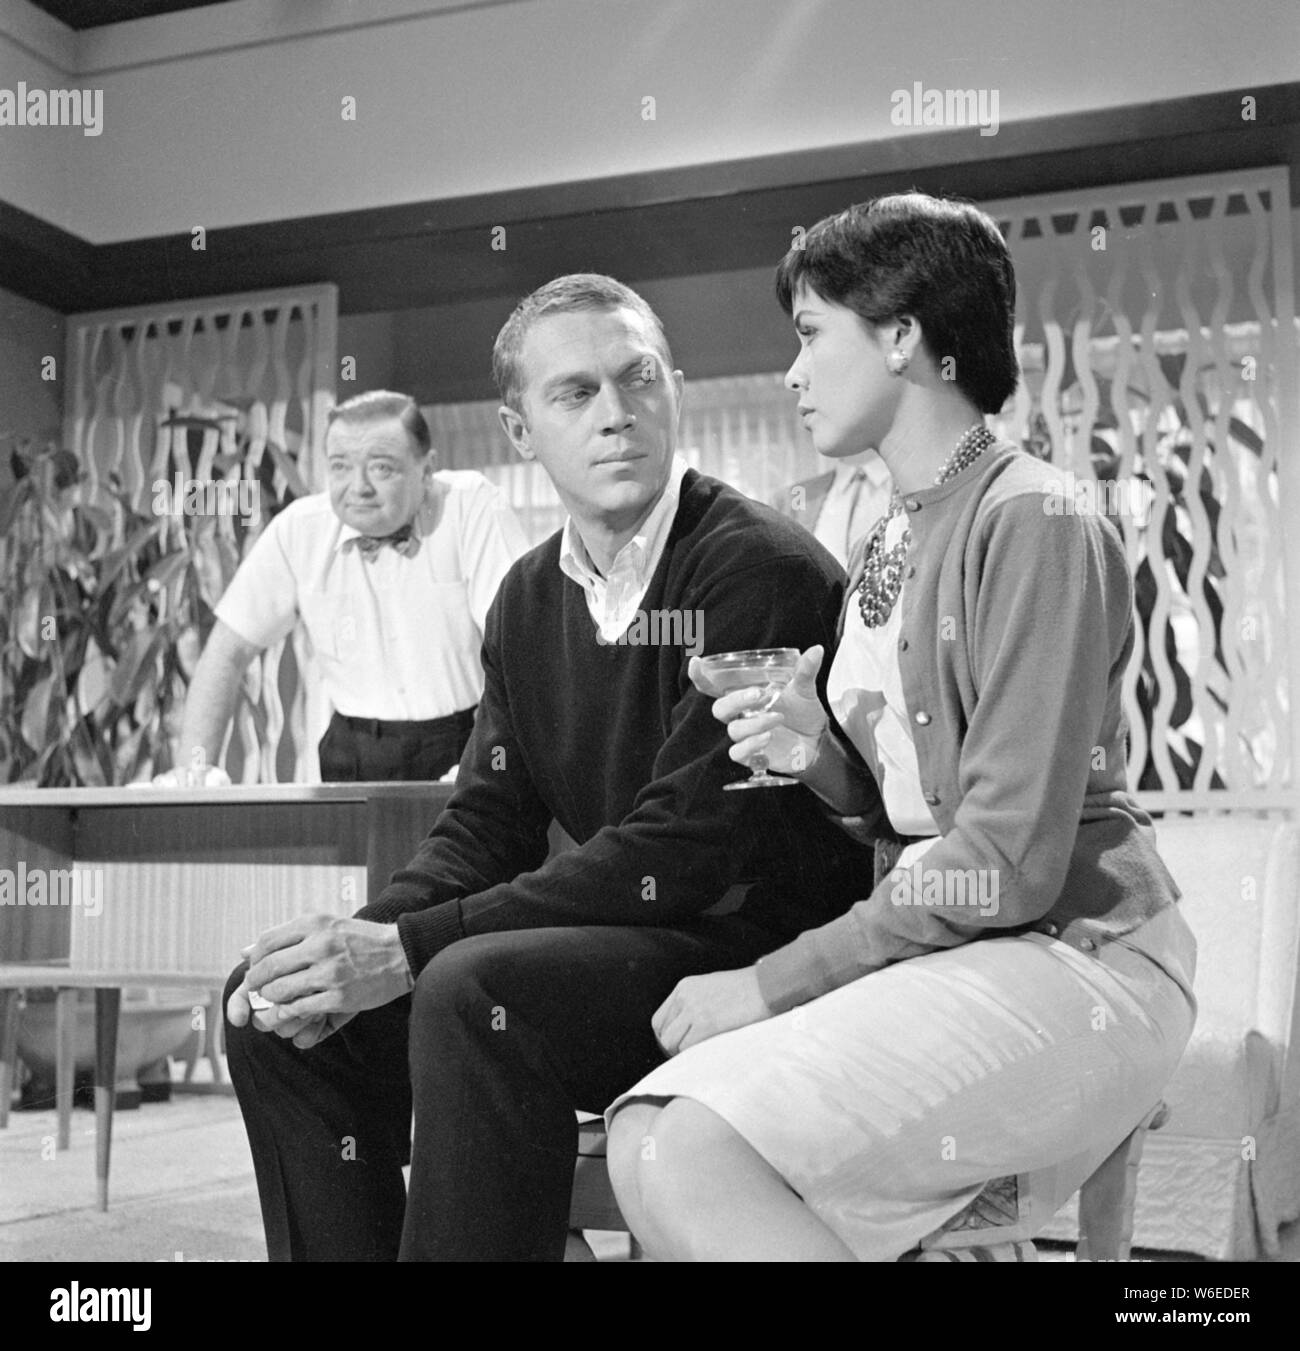 PETER LORRE , STEVE MCQUEEN and NEILE ADAMS in ALFRED HITCHCOCK PRESENTS (1955), directed by ALFRED HITCHCOCK. Credit: SHAMLEY PRODUCTIONS / Album Stock Photo